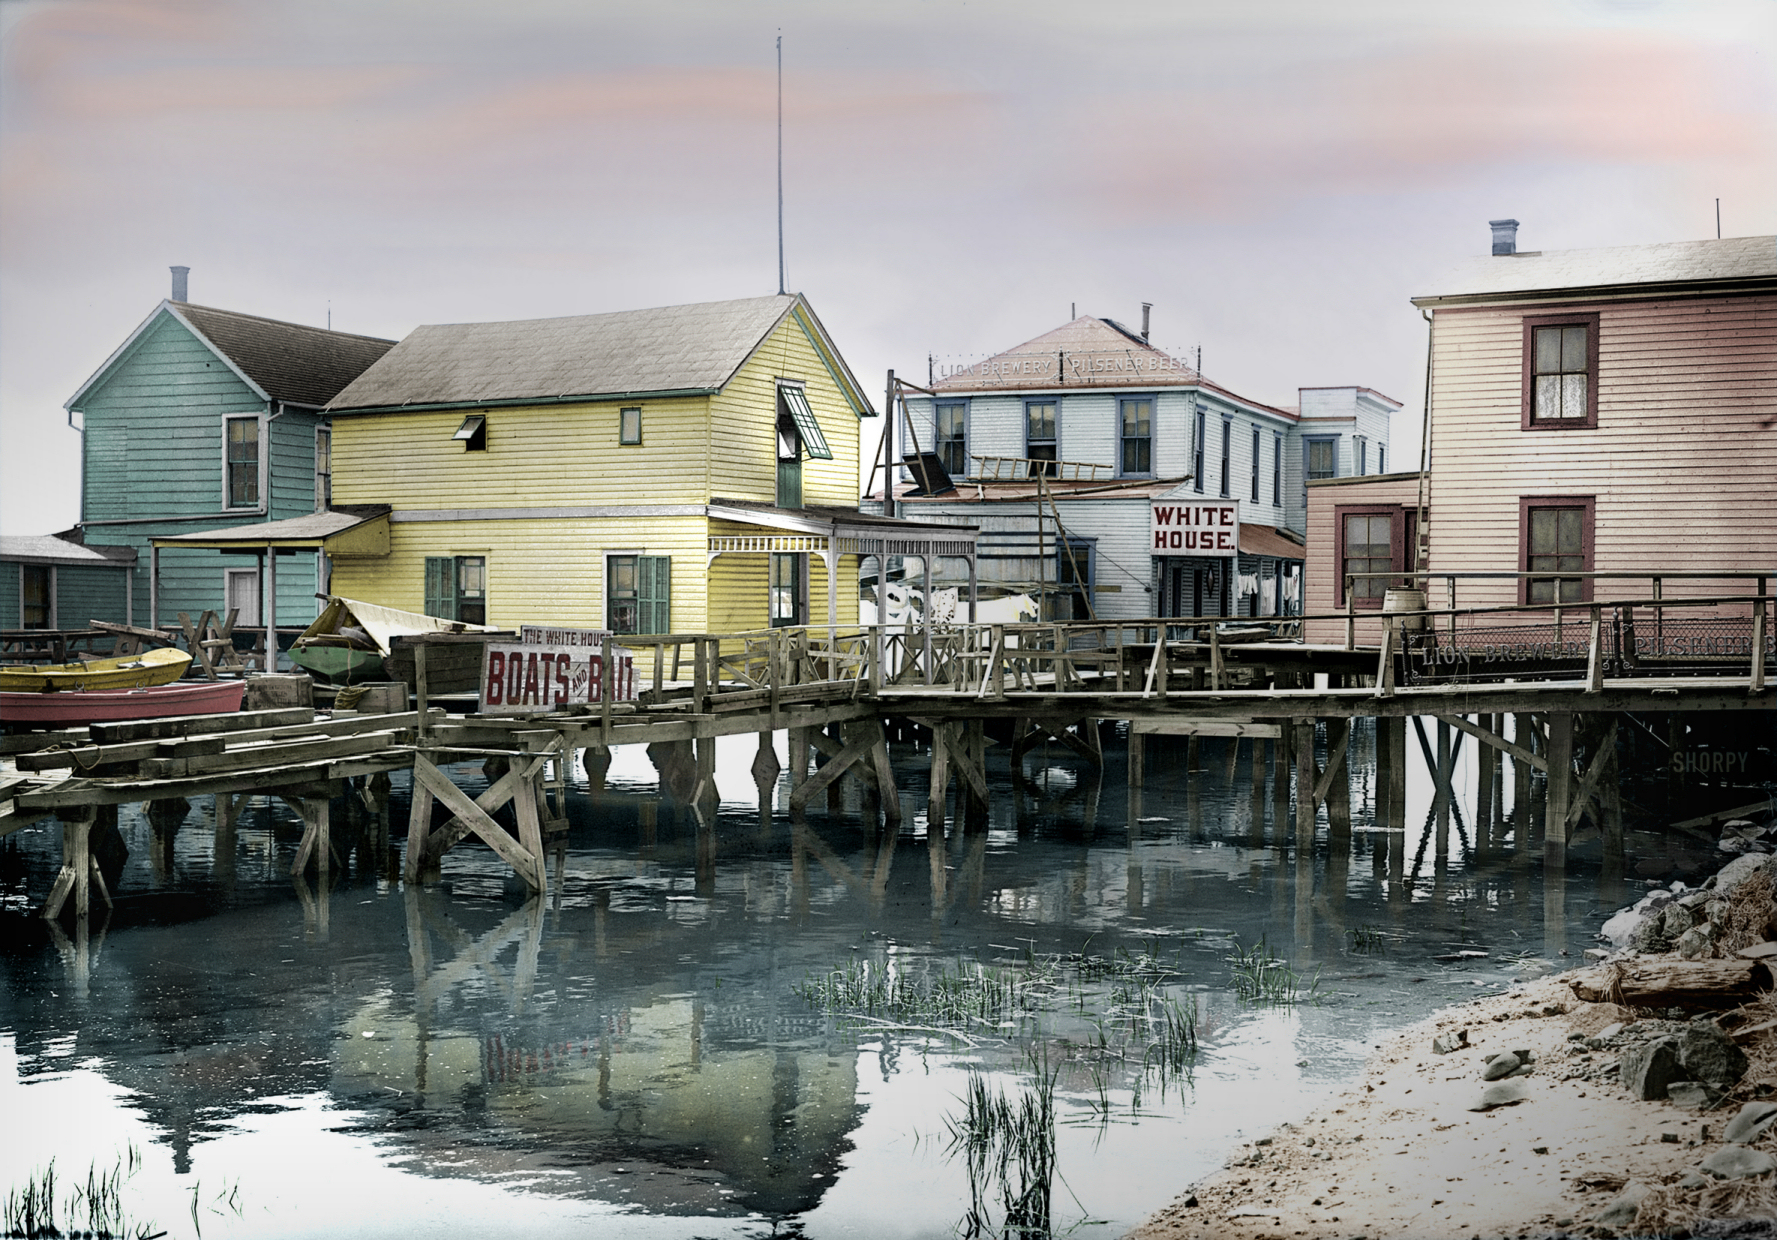 Goose Creek, houses on the water, Jamaica, N.Y. From this Shorpy photo. View full size.